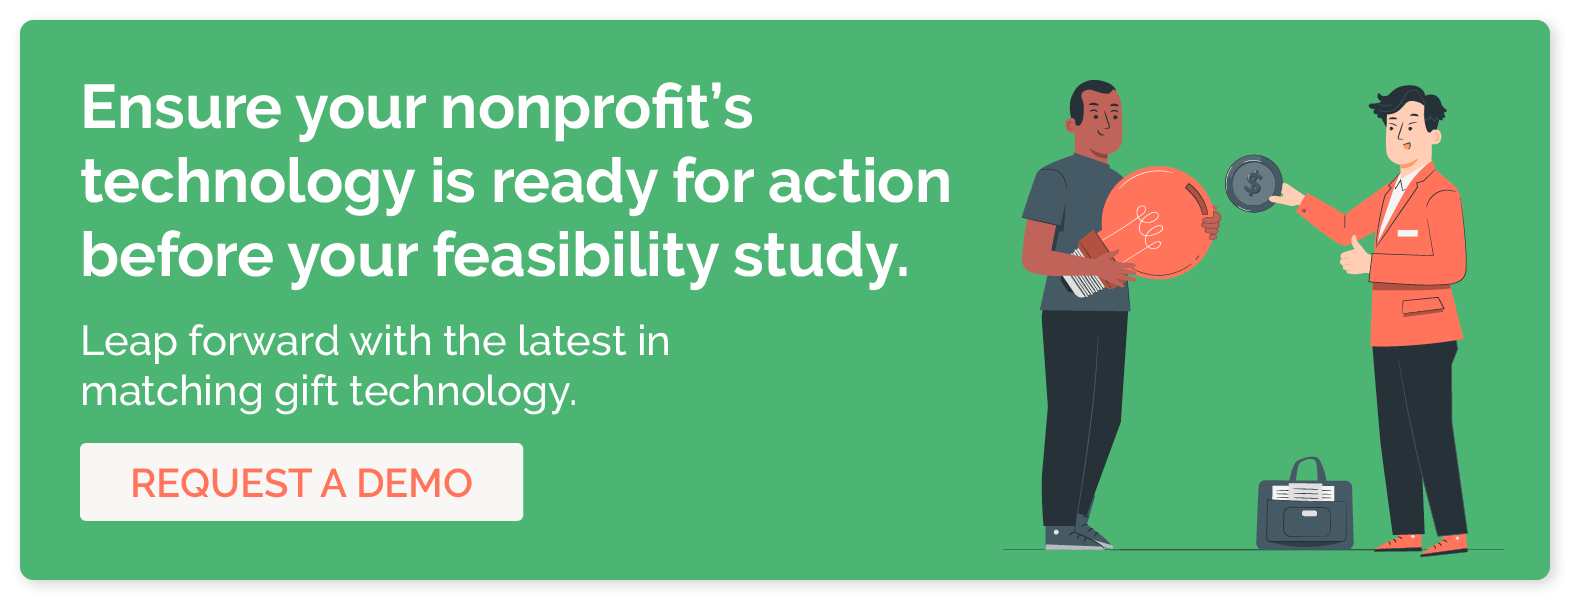 Ensure your nonprofit's technology is ready for action before your feasibility study. Leap forward with the latest in matching gift technology. Request a demo. 